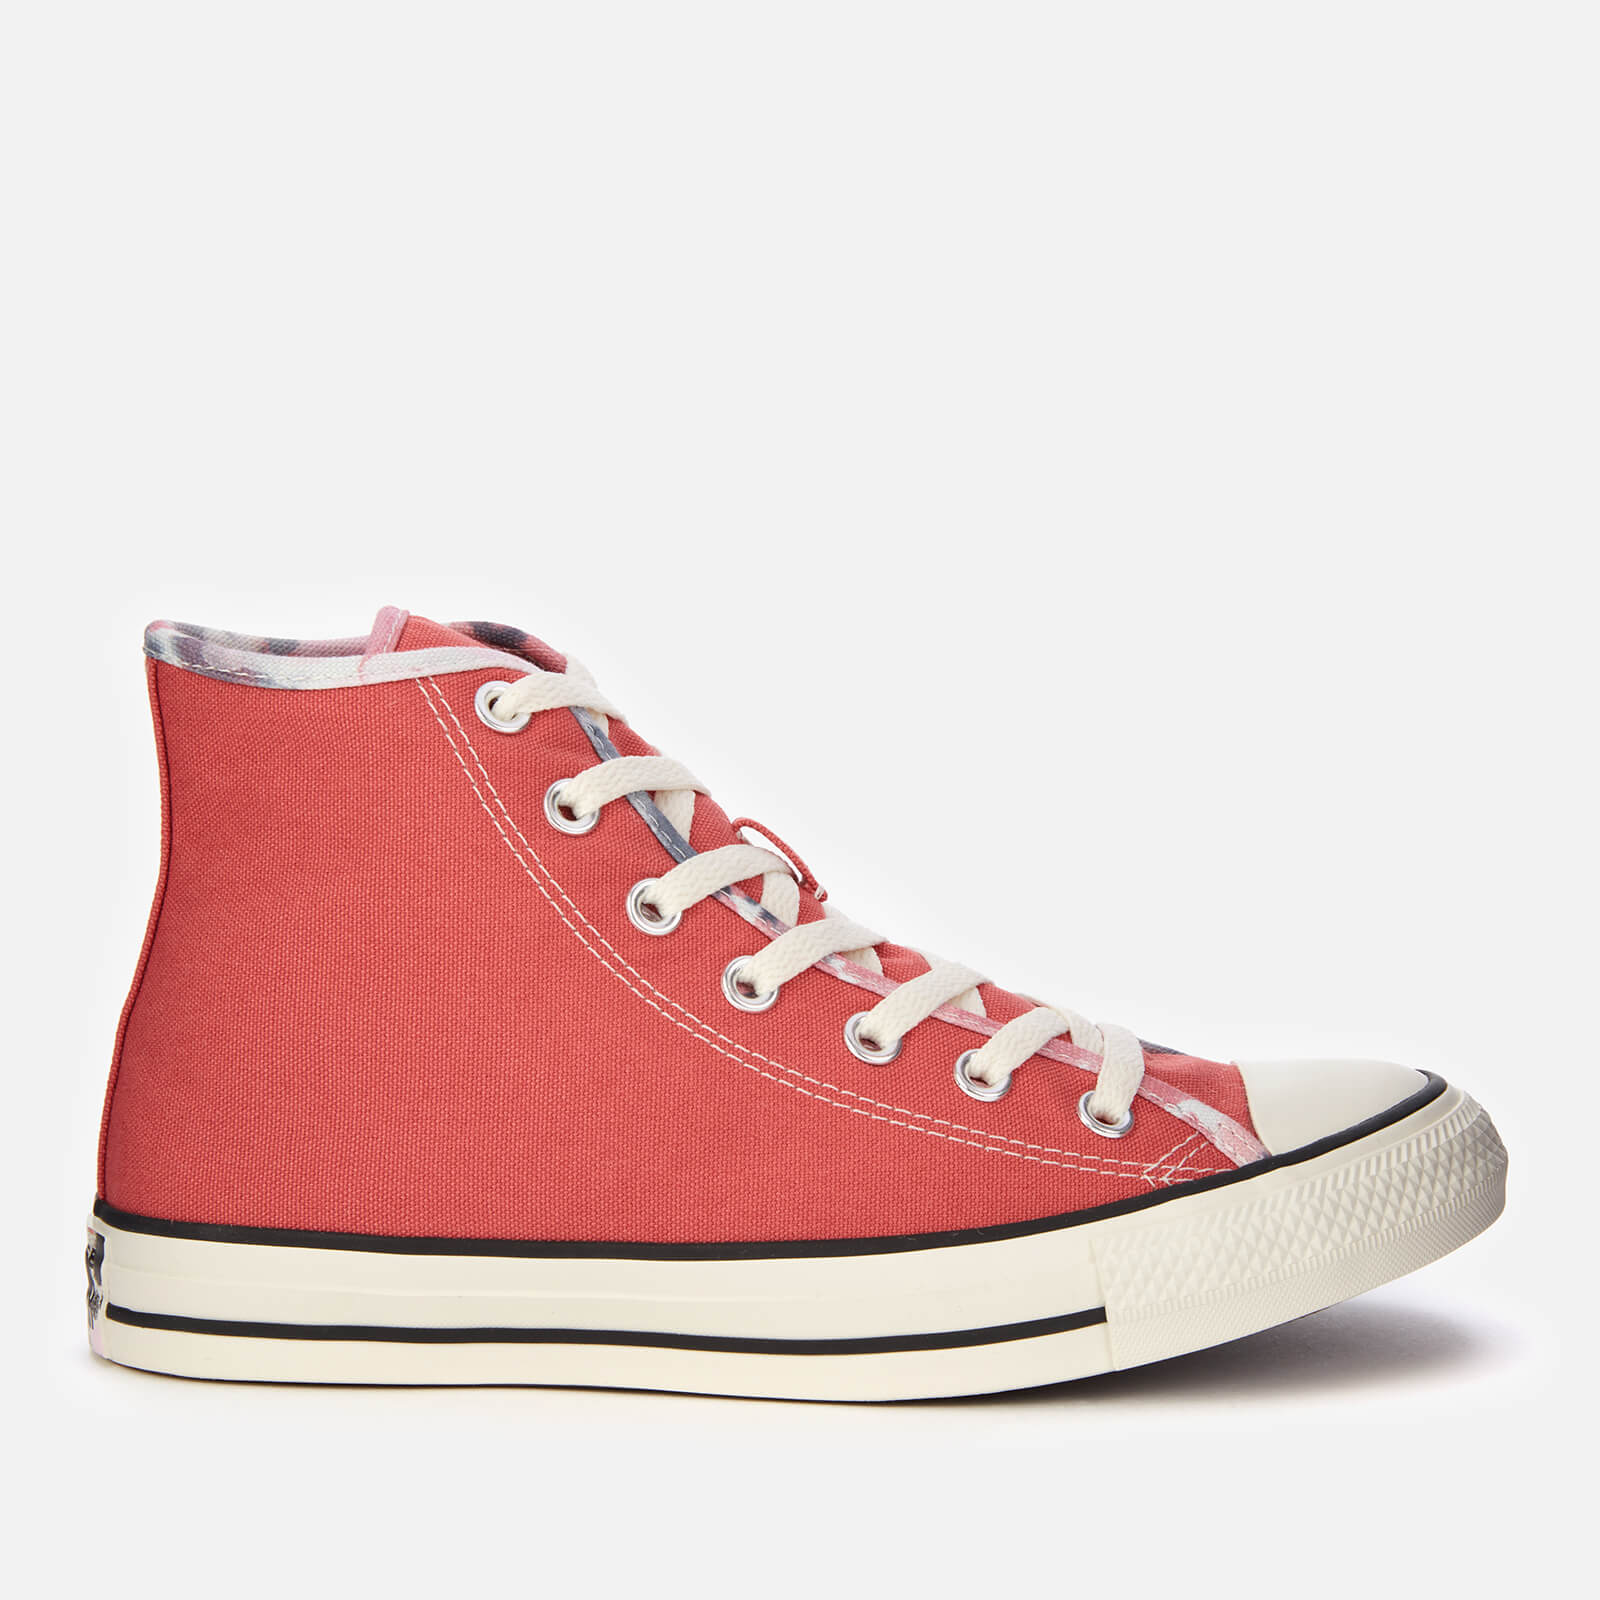 Converse Women's Chuck Taylor All Star Summer Fest Patch Hi-Top Trainers - Pink - UK 3